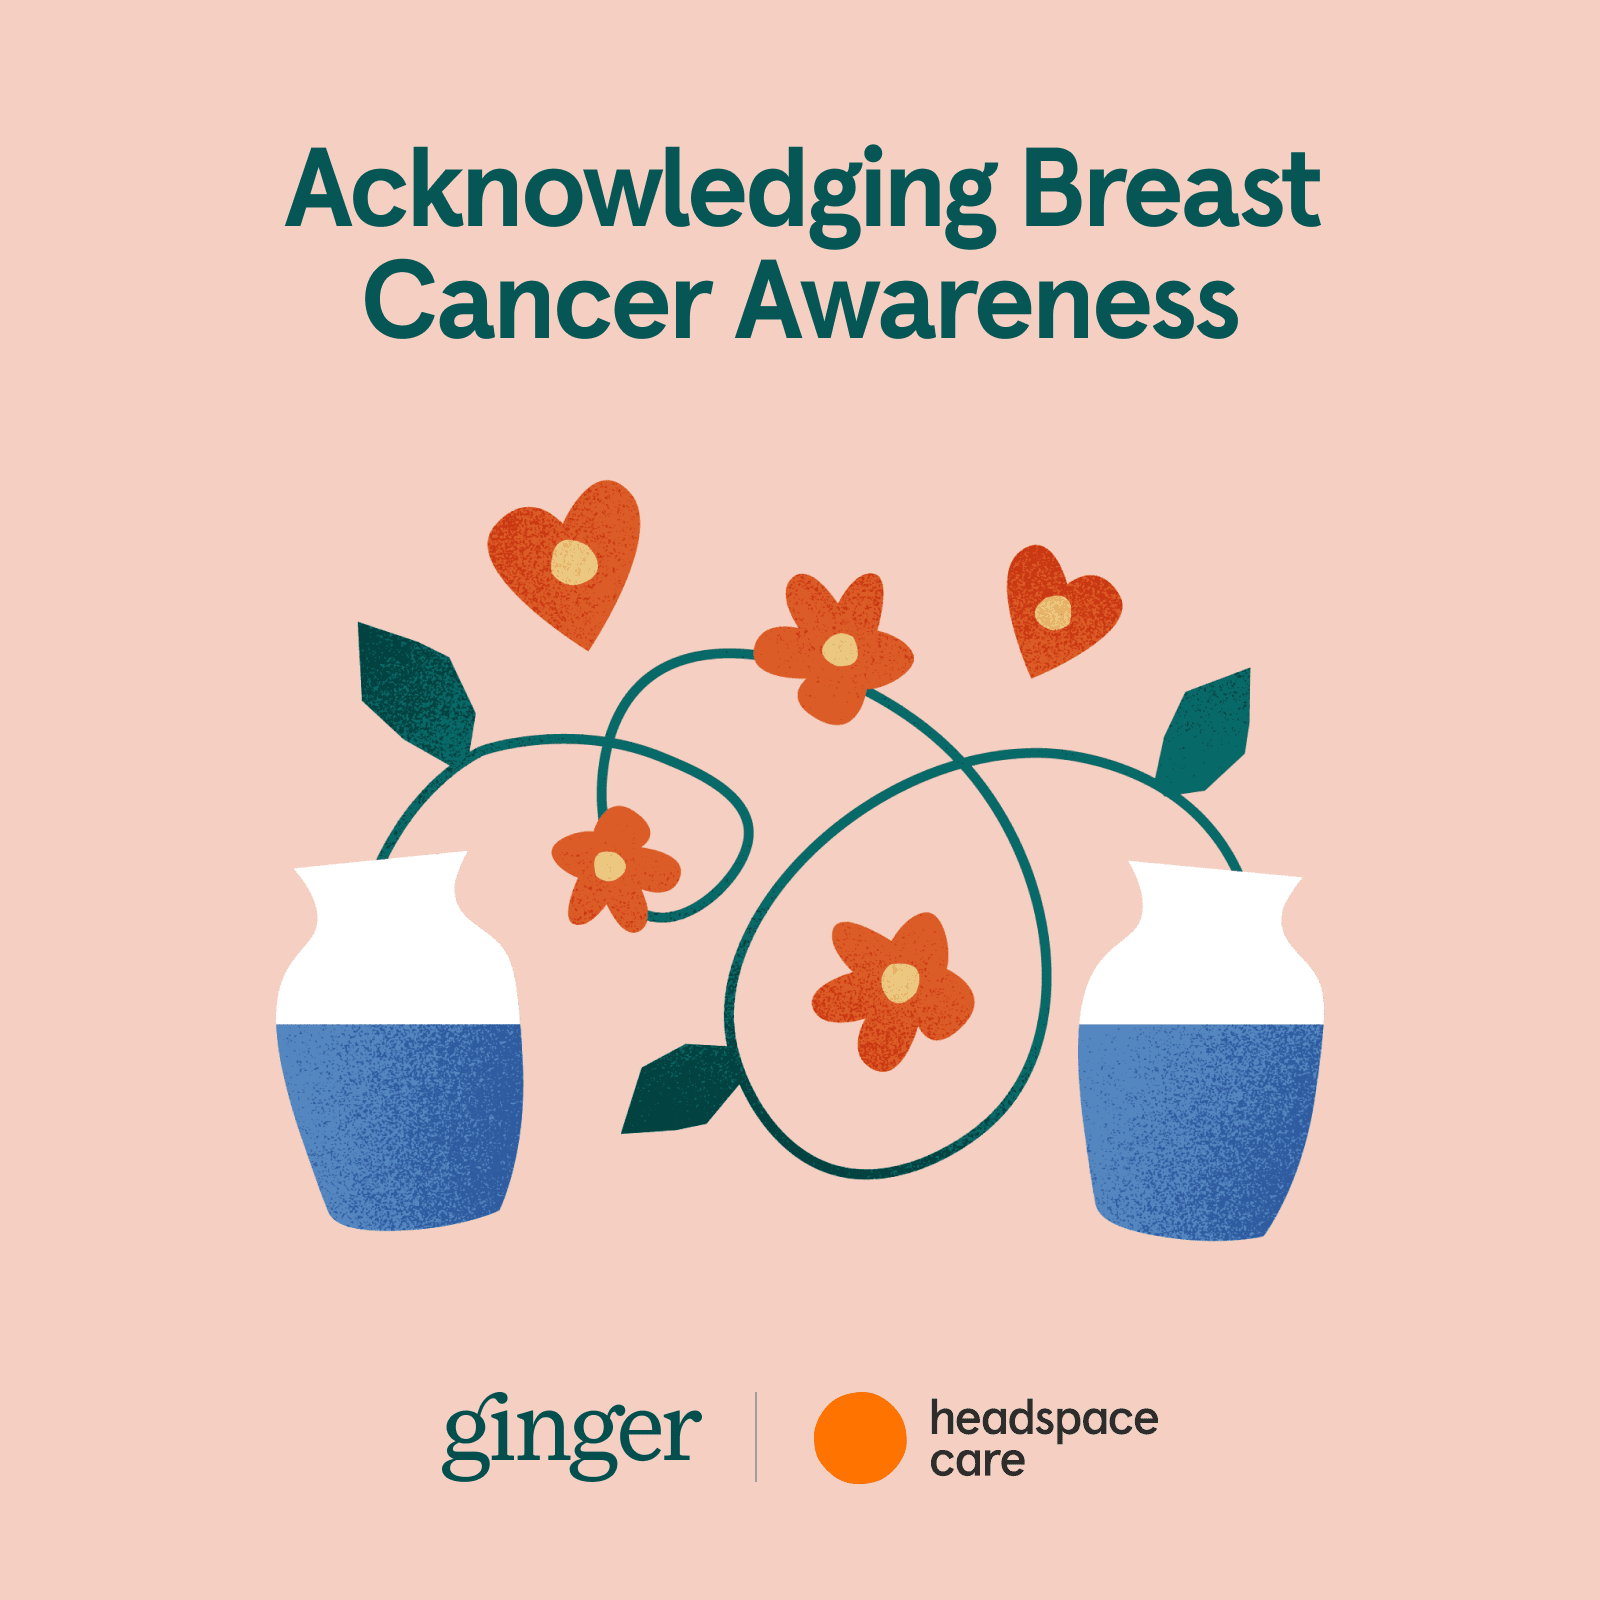 Acknowledging Breast Cancer Awareness with Ginger and Headspace Care